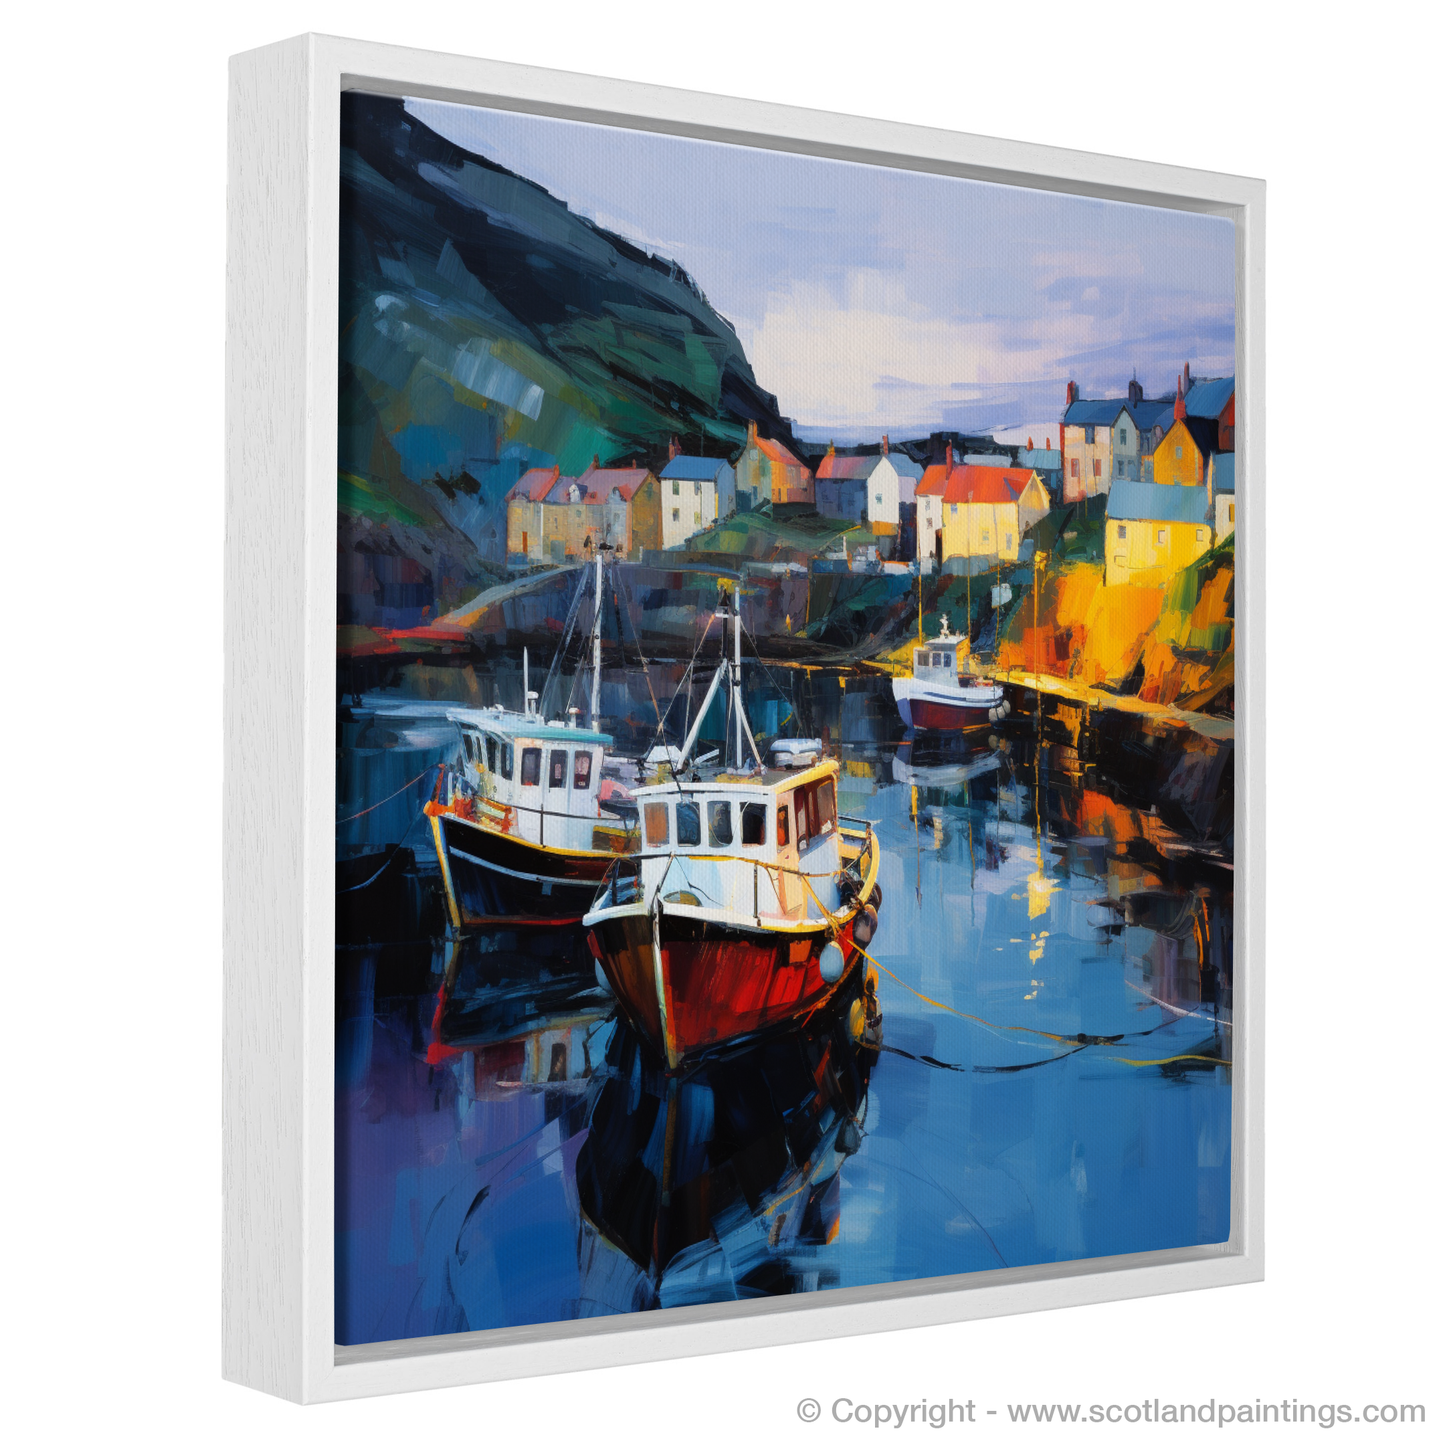 Painting and Art Print of Gardenstown Harbour at dusk entitled "Dusk at Gardenstown Harbour: An Expressionist Ode to Scottish Coastal Beauty".